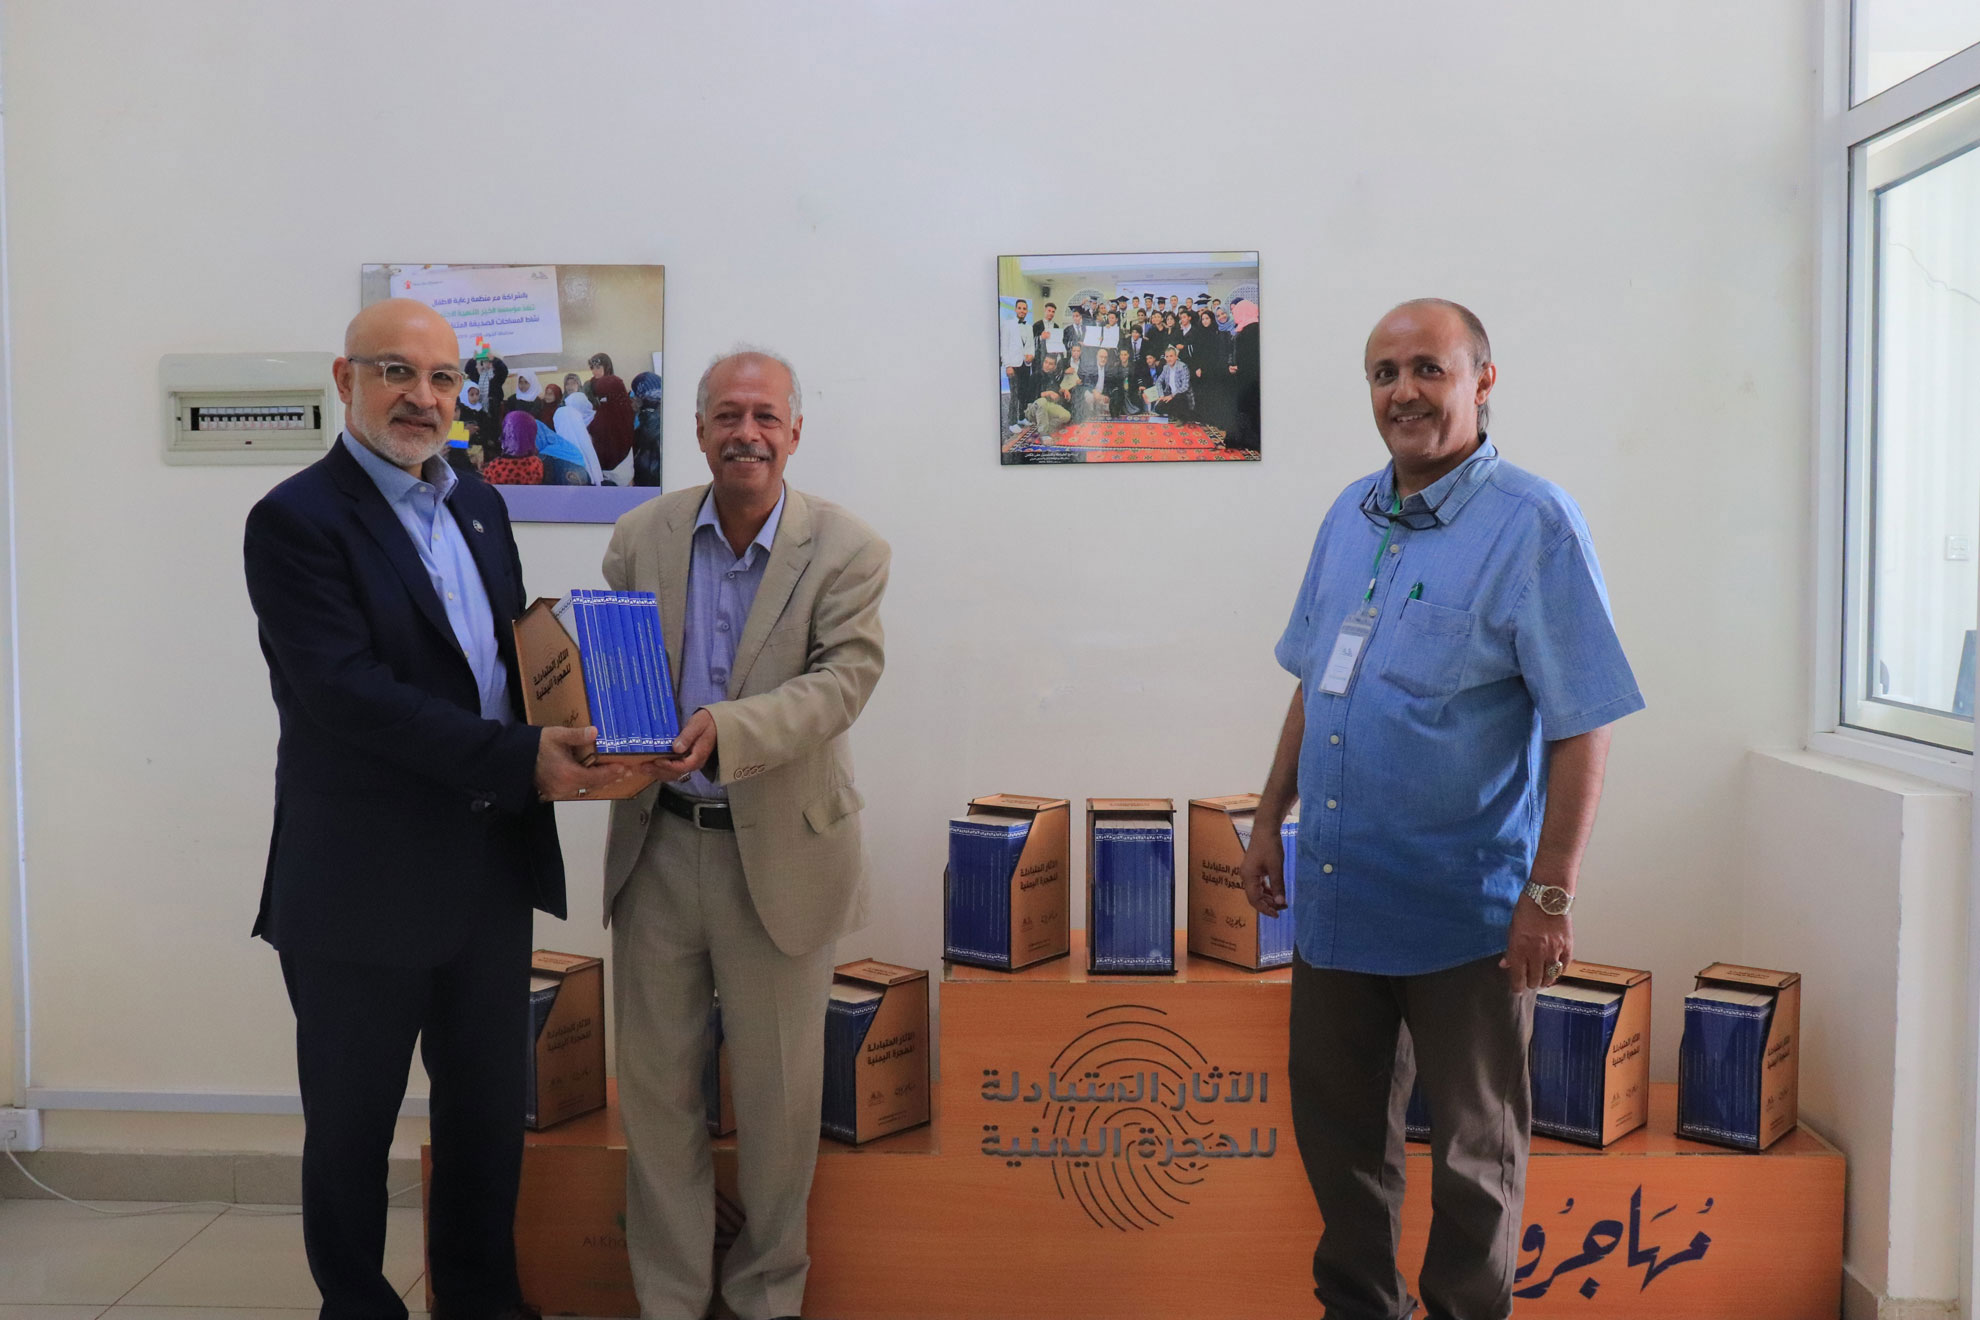  The Vice-Chairman of the General Authority of Archaeology and Museums Receives the Study of Yemeni Migration-Reciprocal Impacts